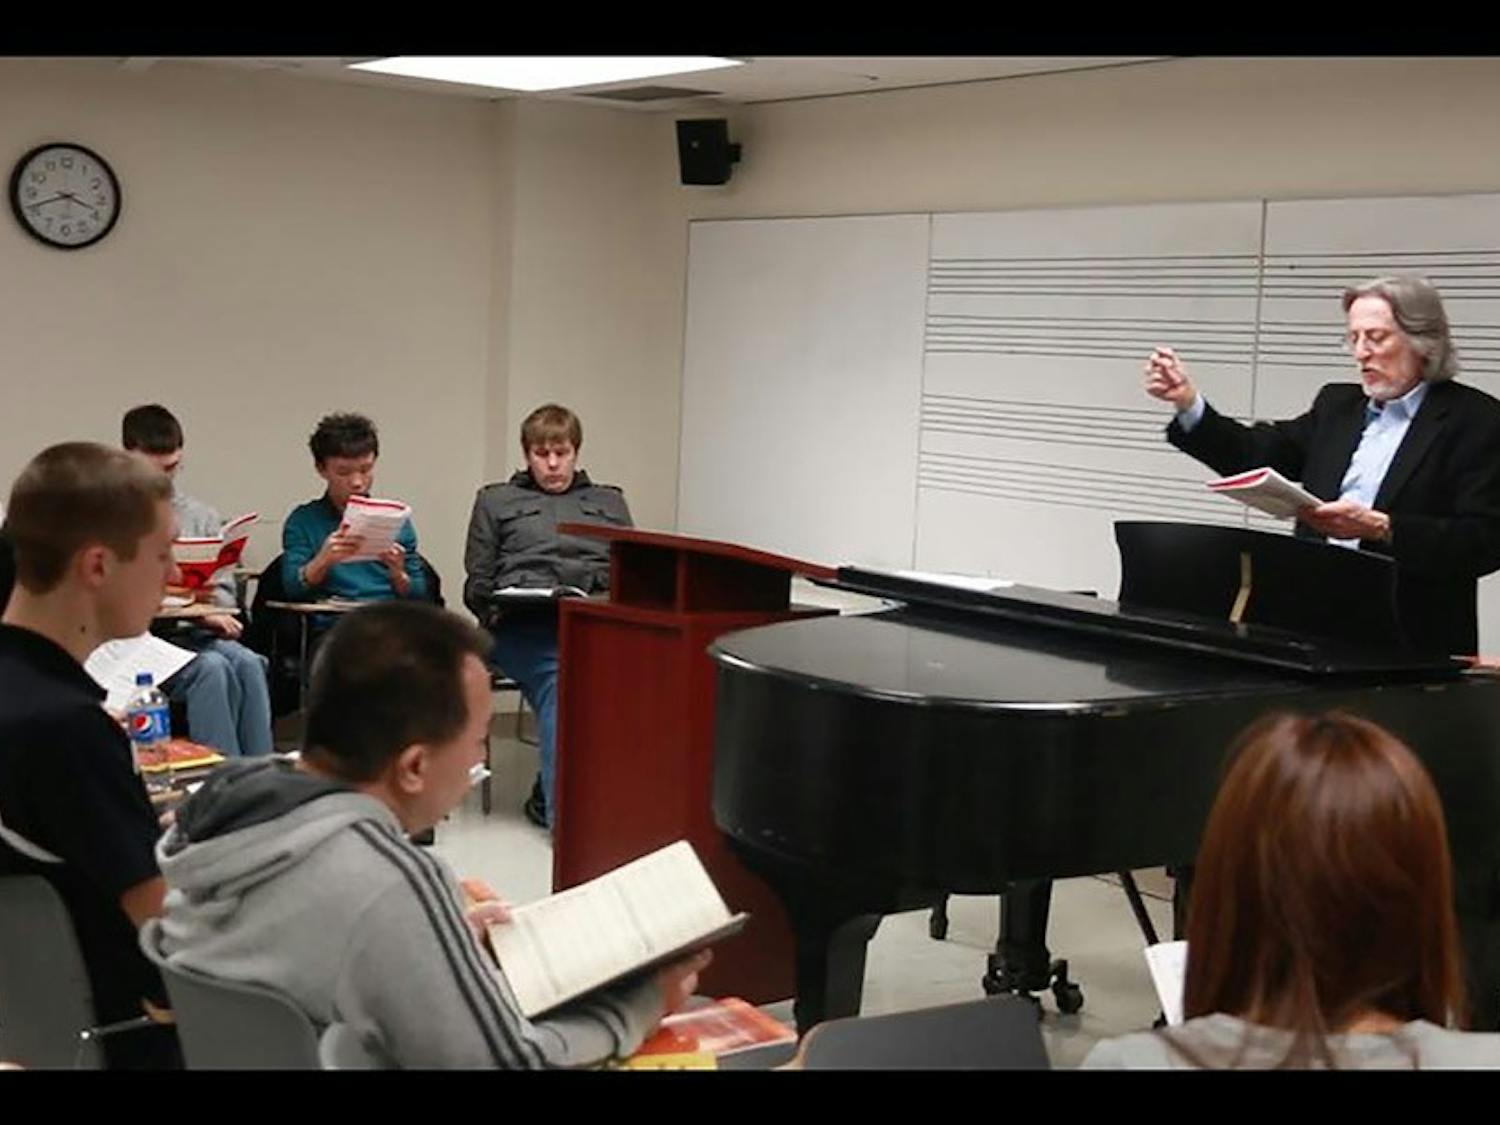 Rosenbaum is an award-winning conductor who has conducted numerous choirs. He teaches at UB two days a week, only to fly back every Thursday to continue working on his various projects in NYC.